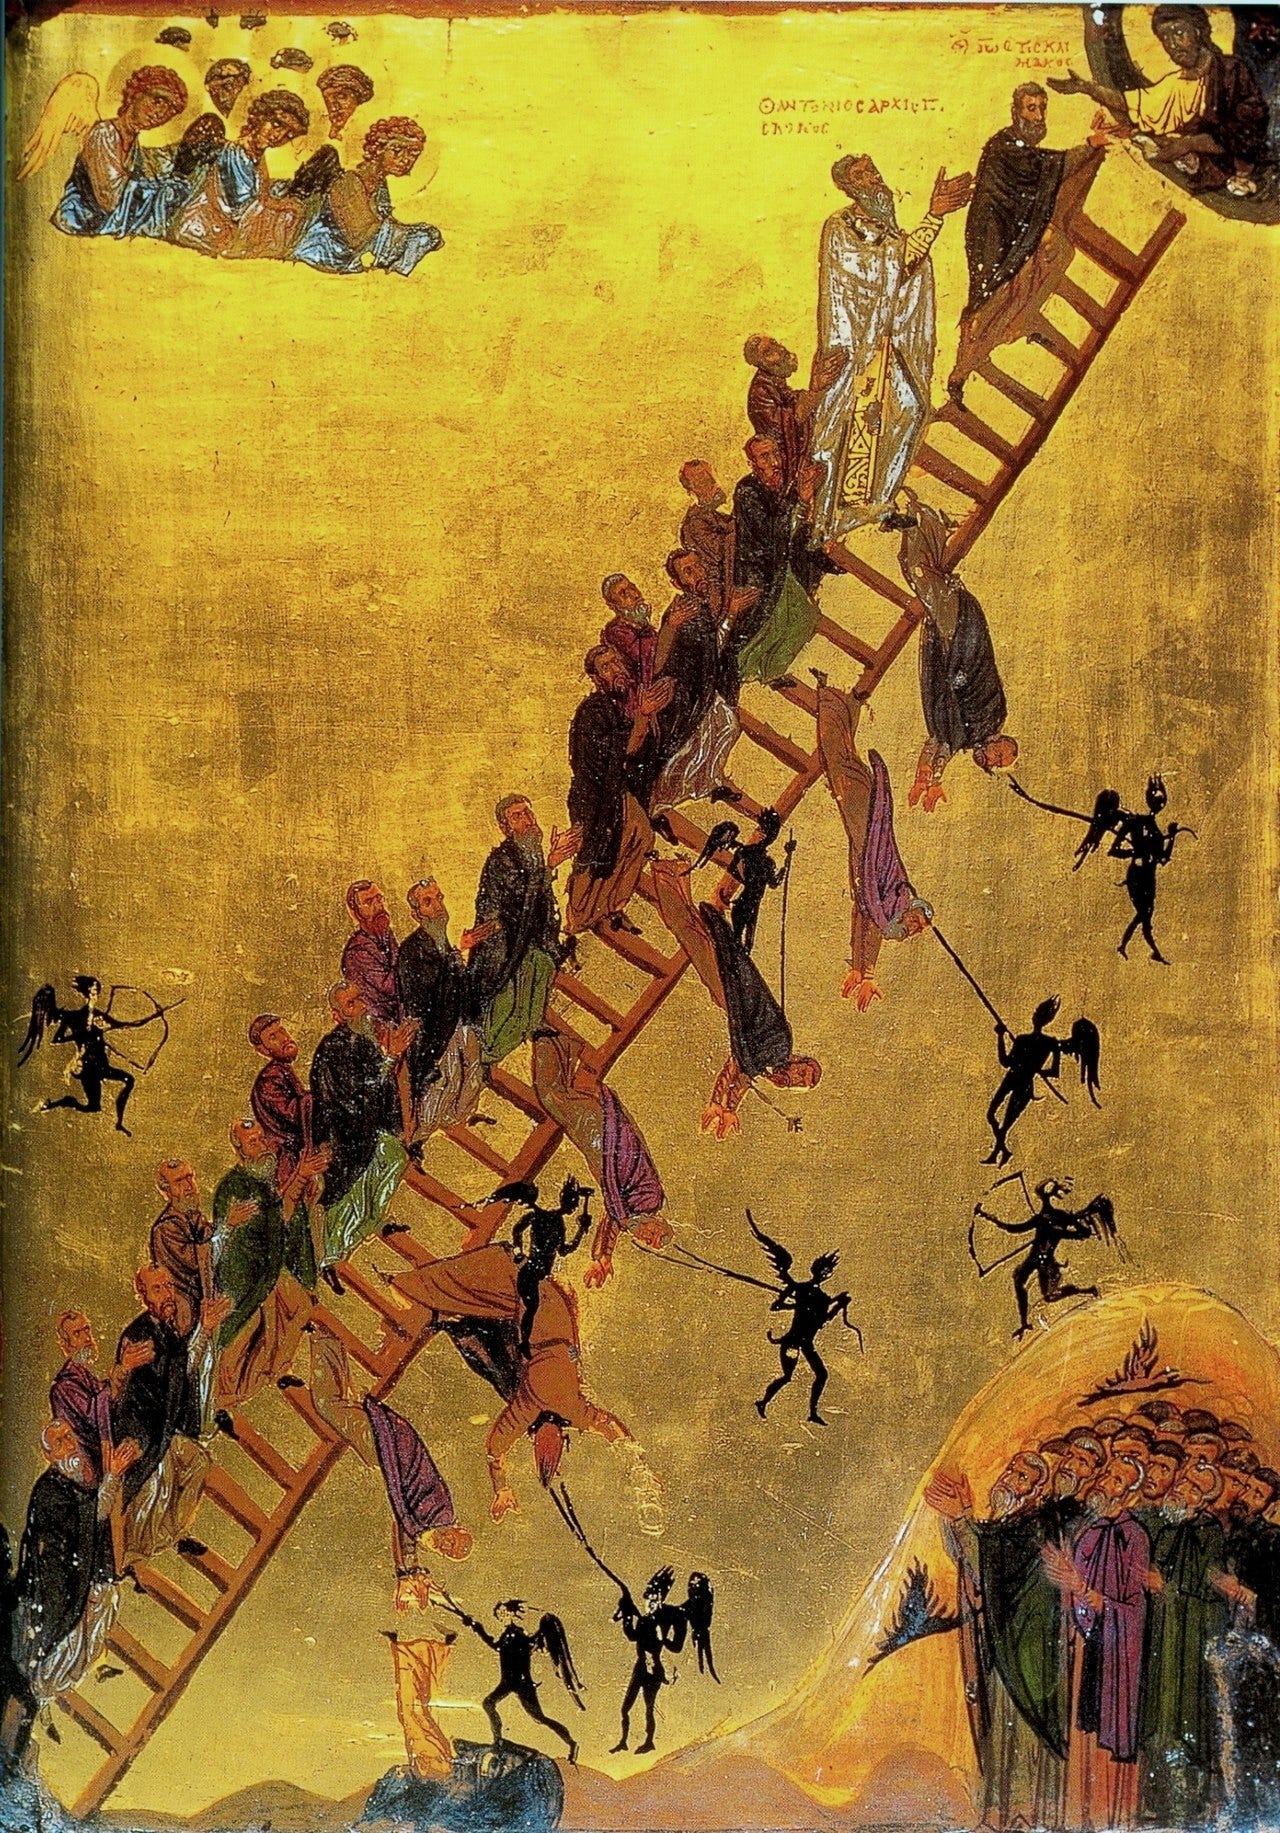 John Climacus is shown at the top of the The Ladder of Divine Ascent icon, with other monks following him, 12th-century icon (Saint Catherine's Monastery, Mount Sinai, Egypt)